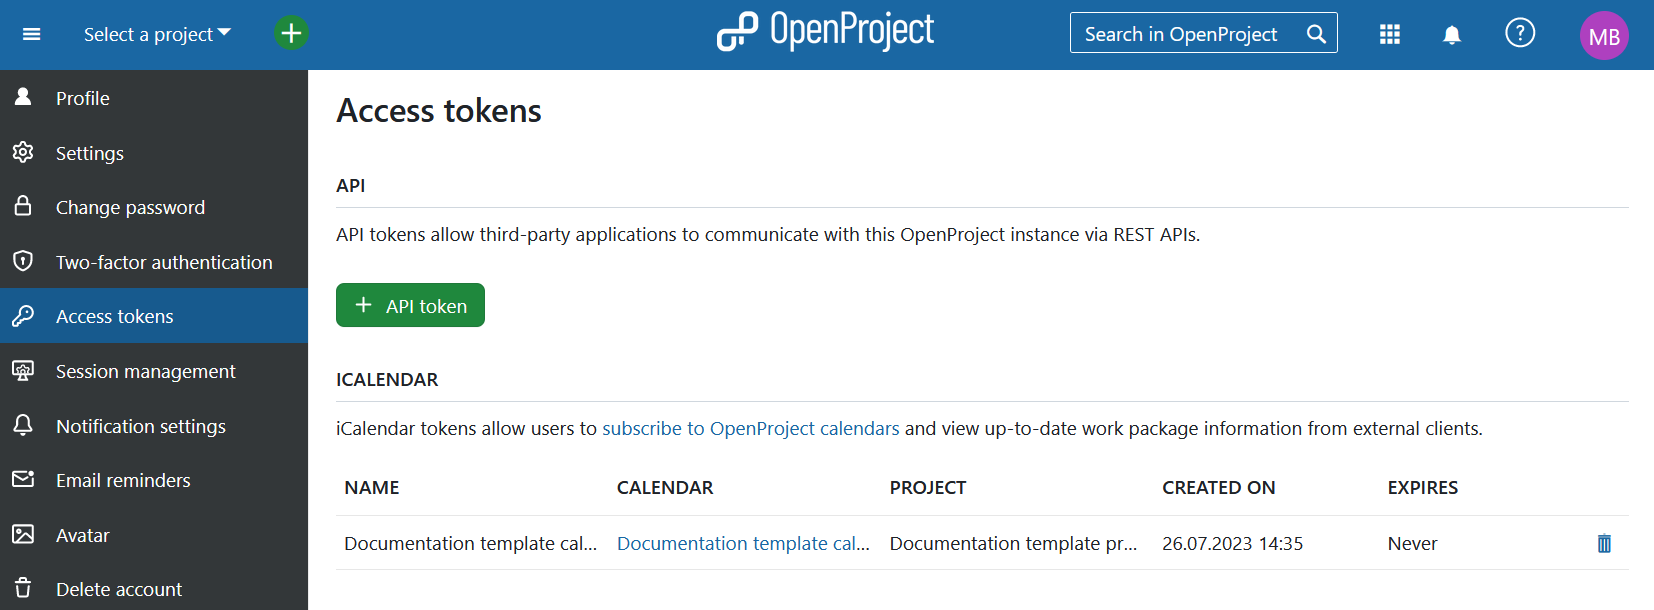 openproject_my_account_access_tokens